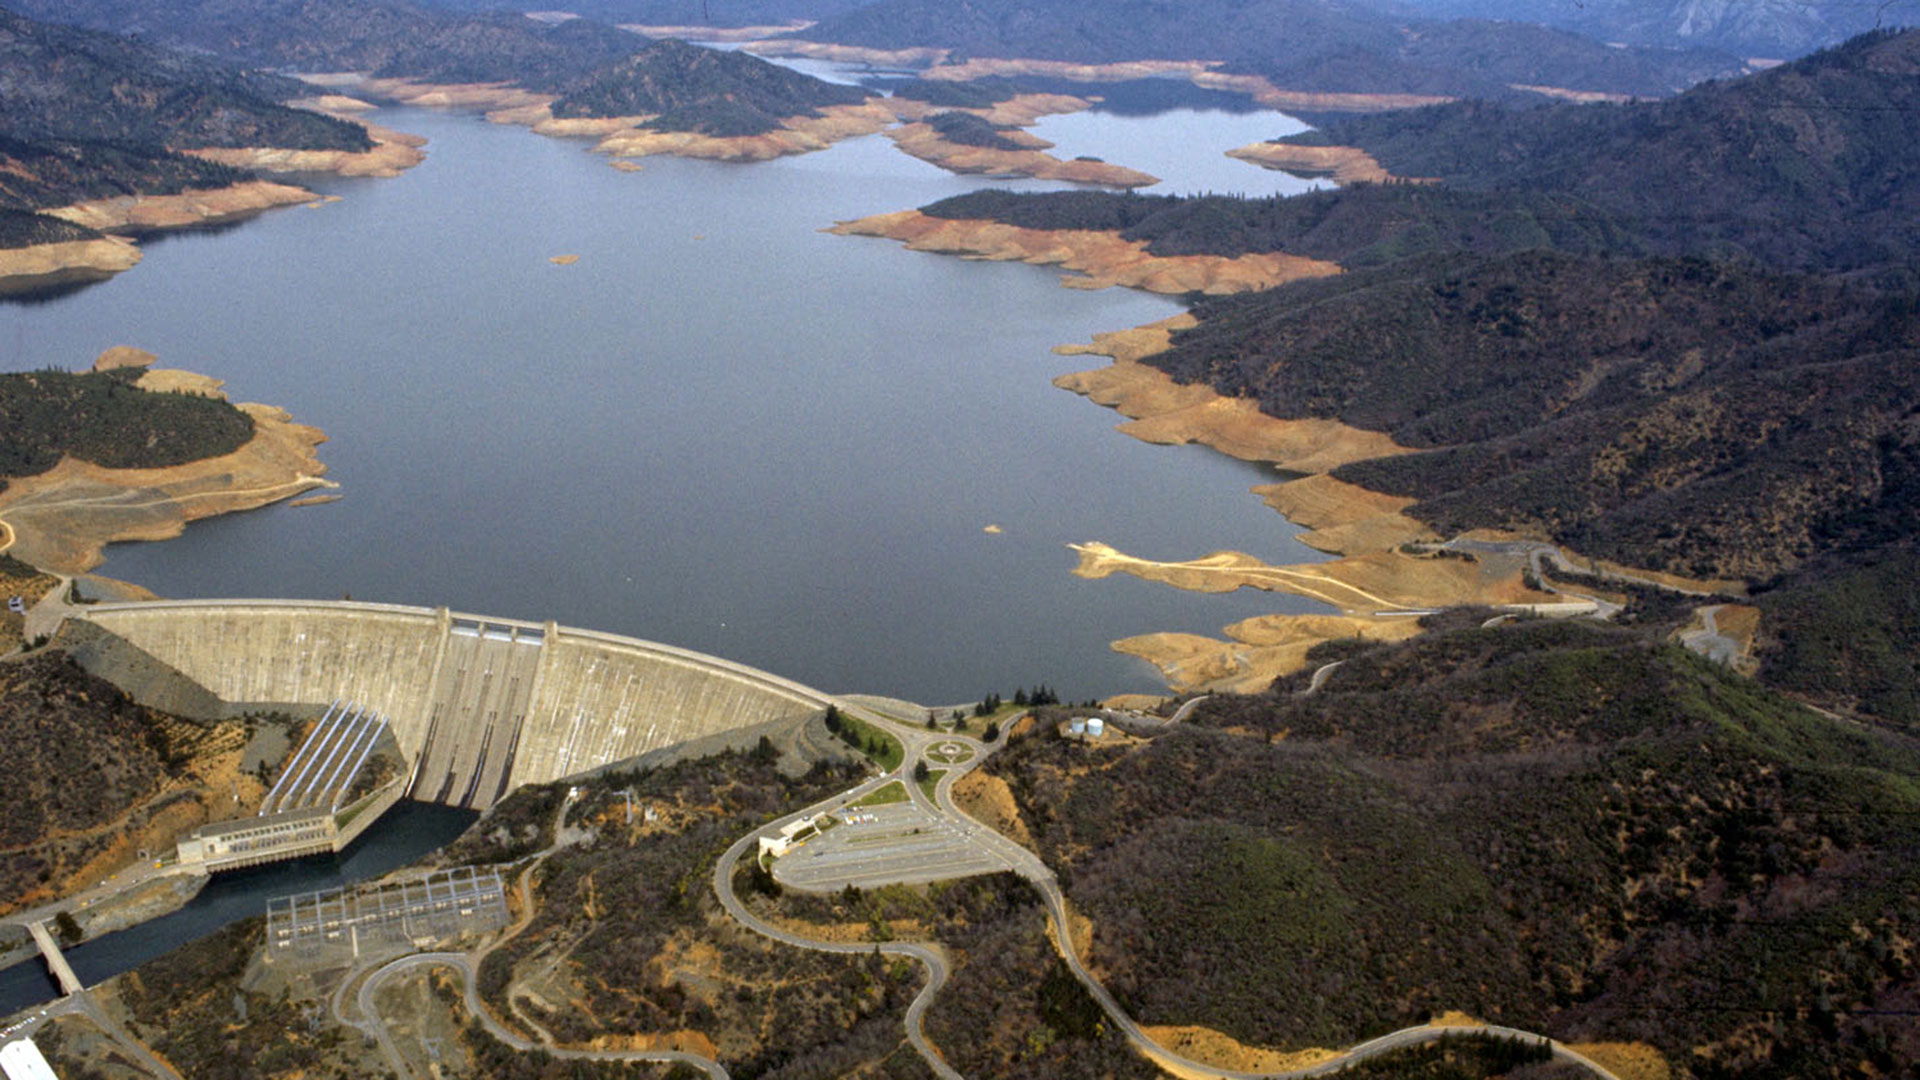 Aerial view of a lake. The dam is visible and a dry shoreline peeks out above the water.